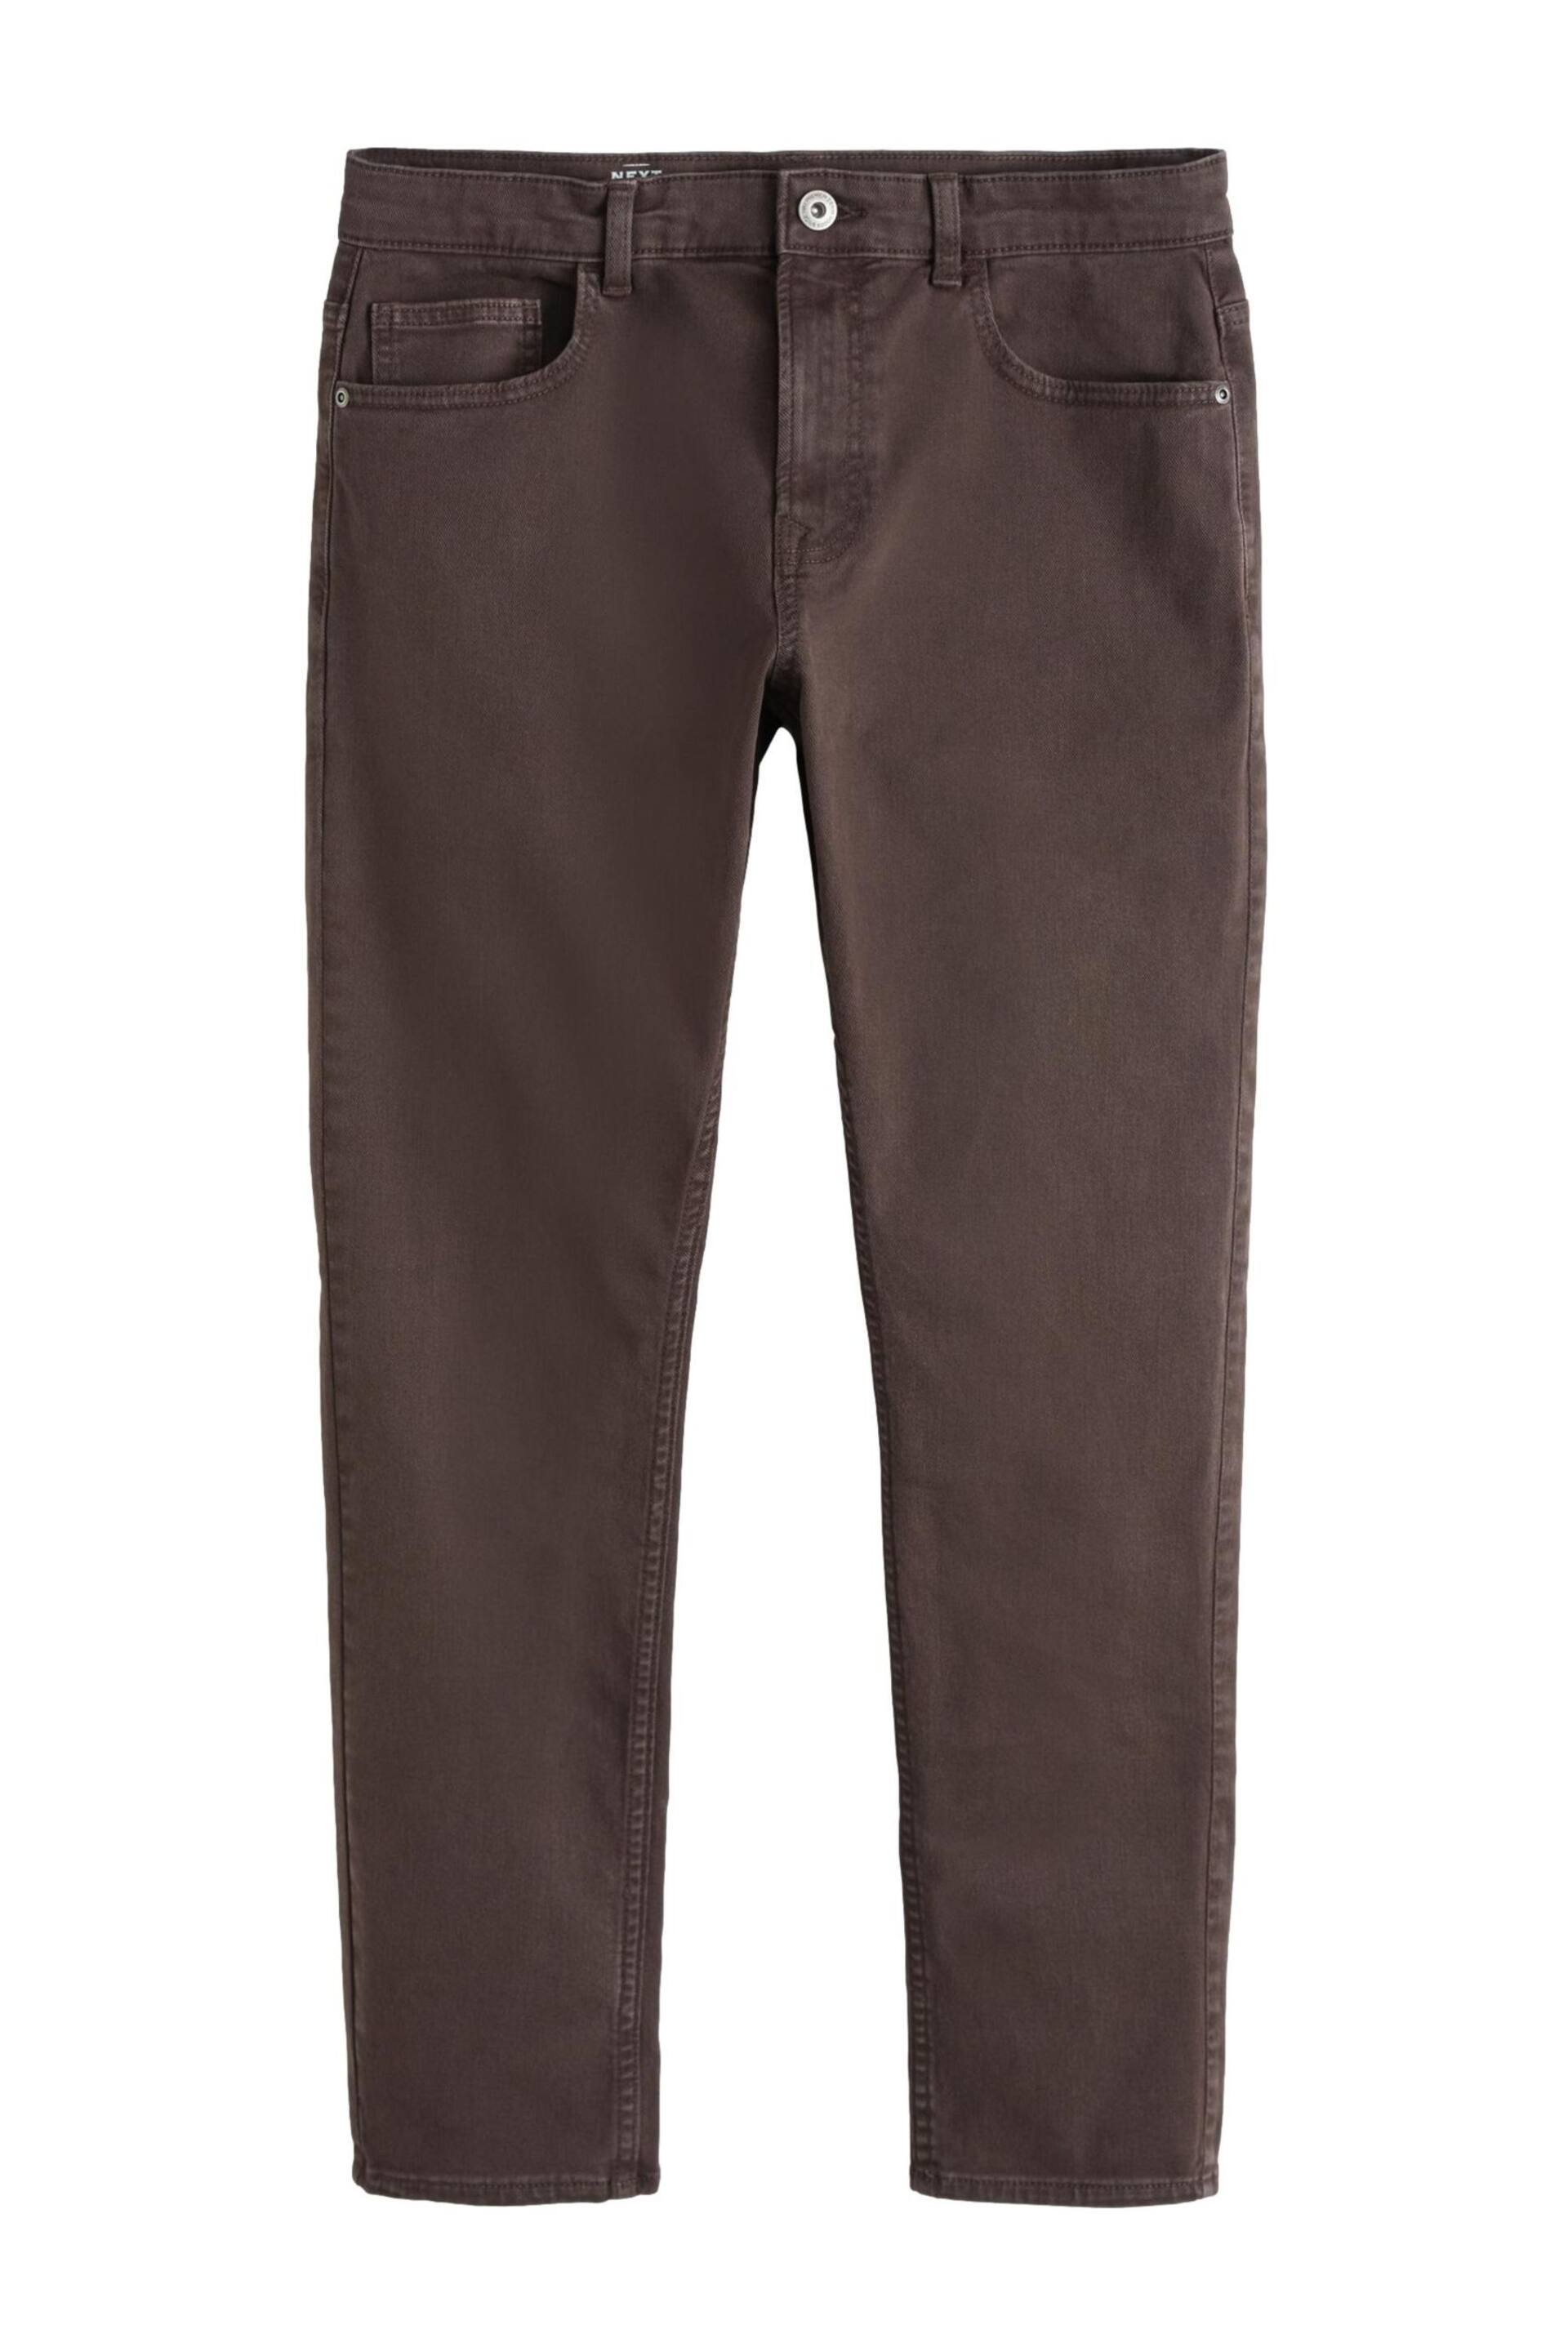 Brown Slim Fit Coloured Stretch Jeans - Image 6 of 7